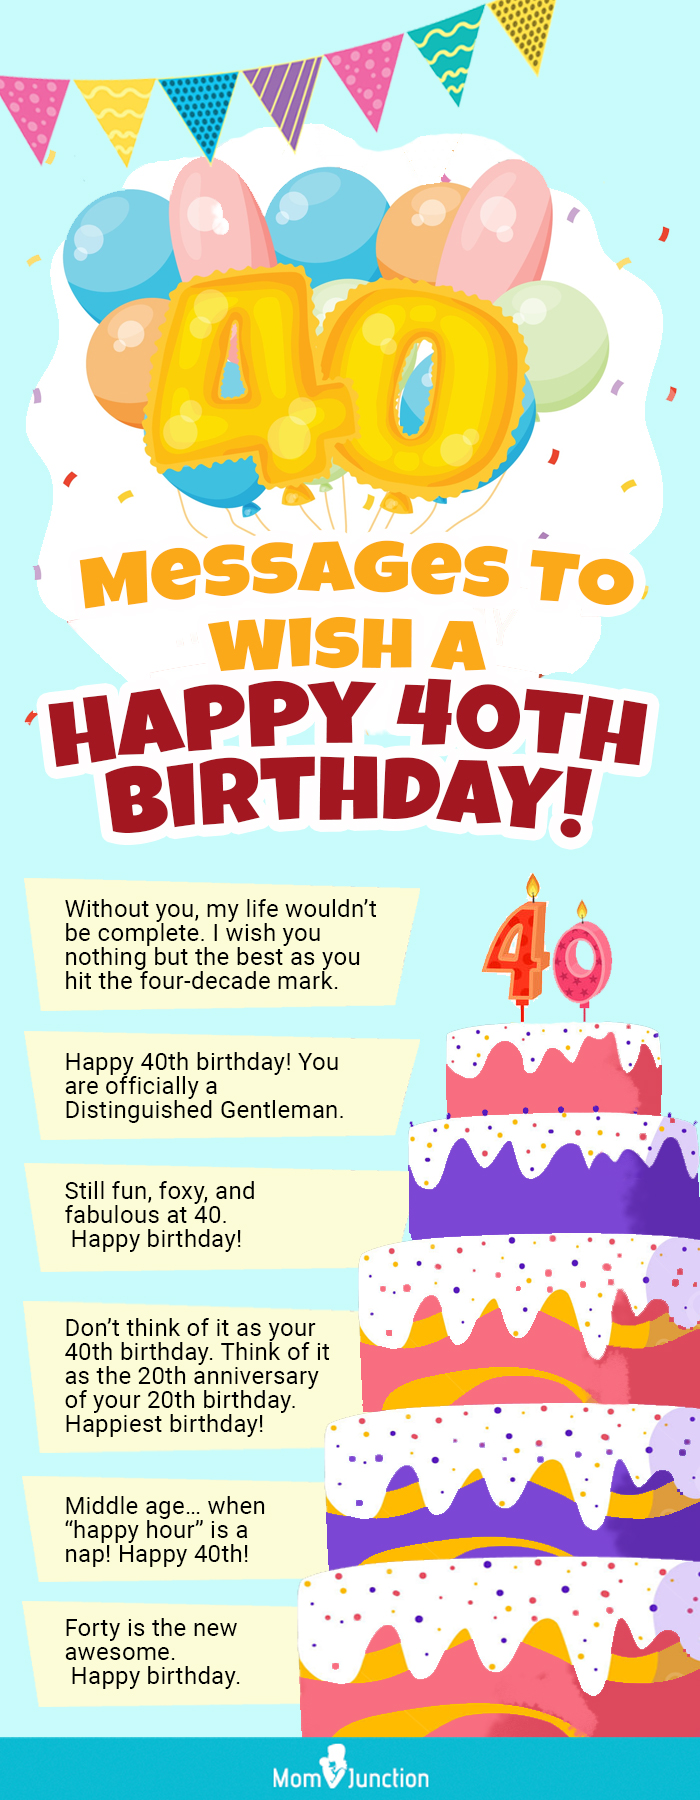 80 Best Friend Happy Birthday Wishes - B-Day Messages for Friend